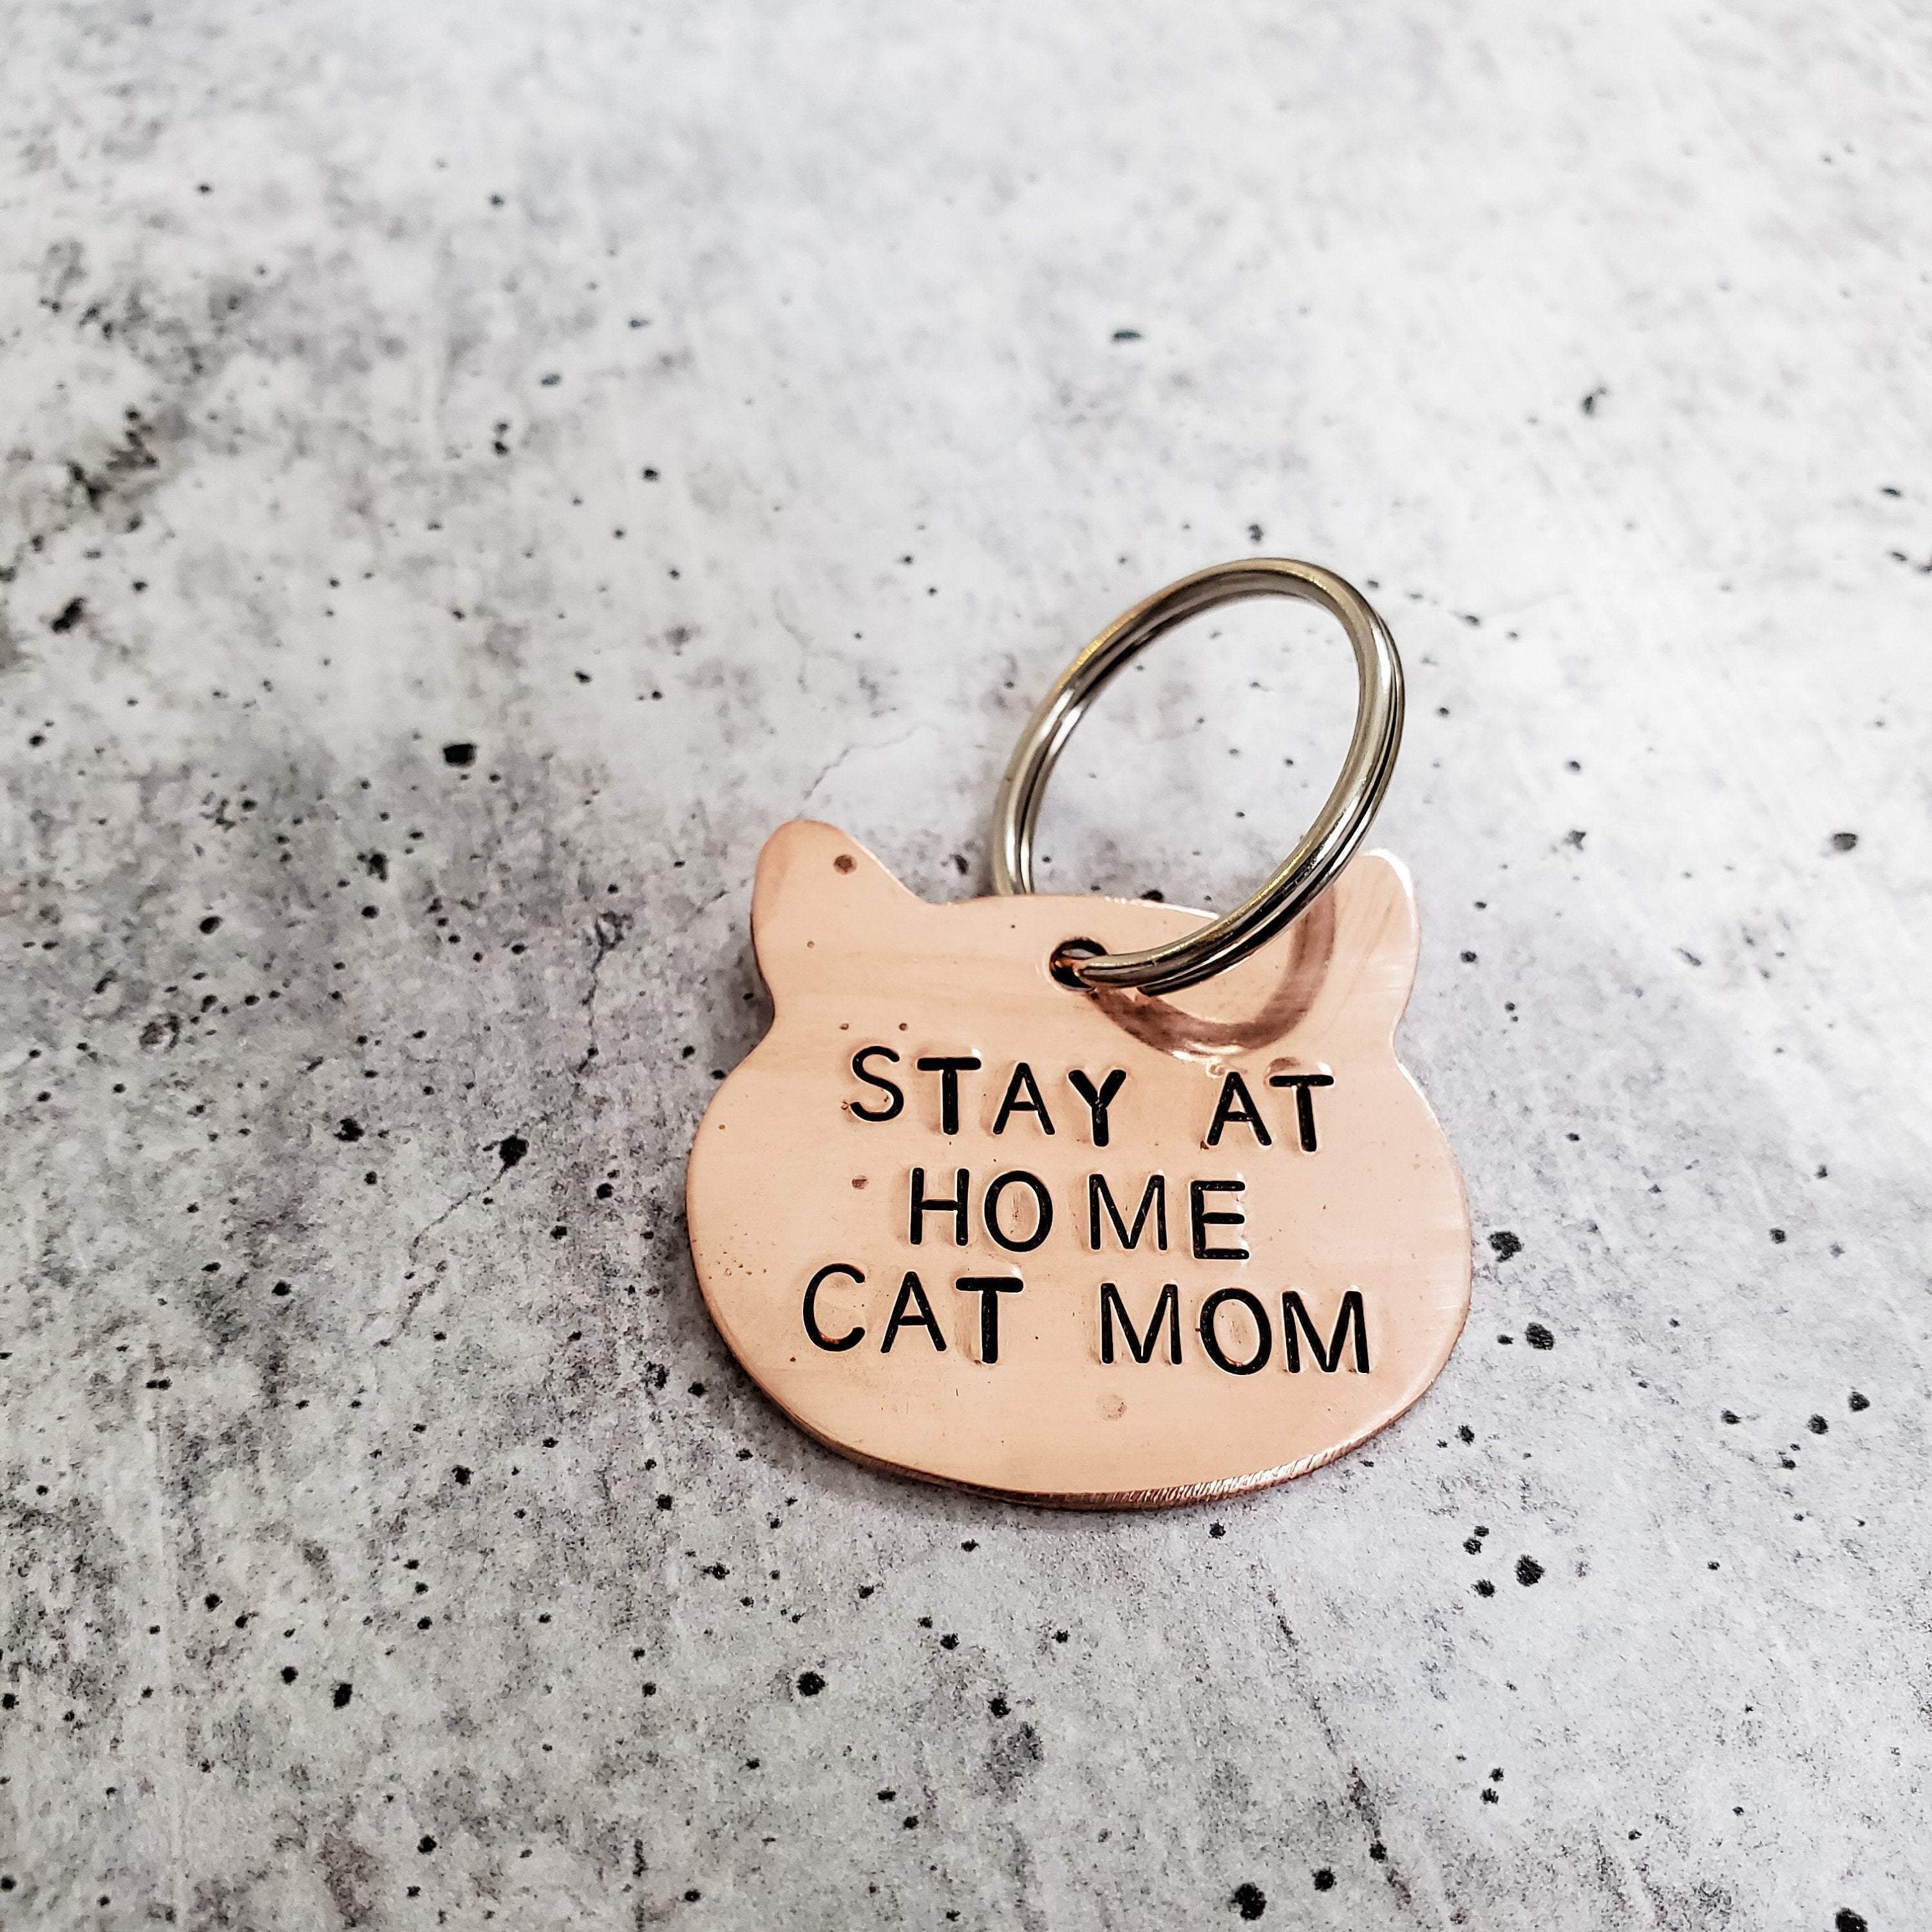 STAY AT HOME CAT MOM Copper Cat Keychain Salt and Sparkle